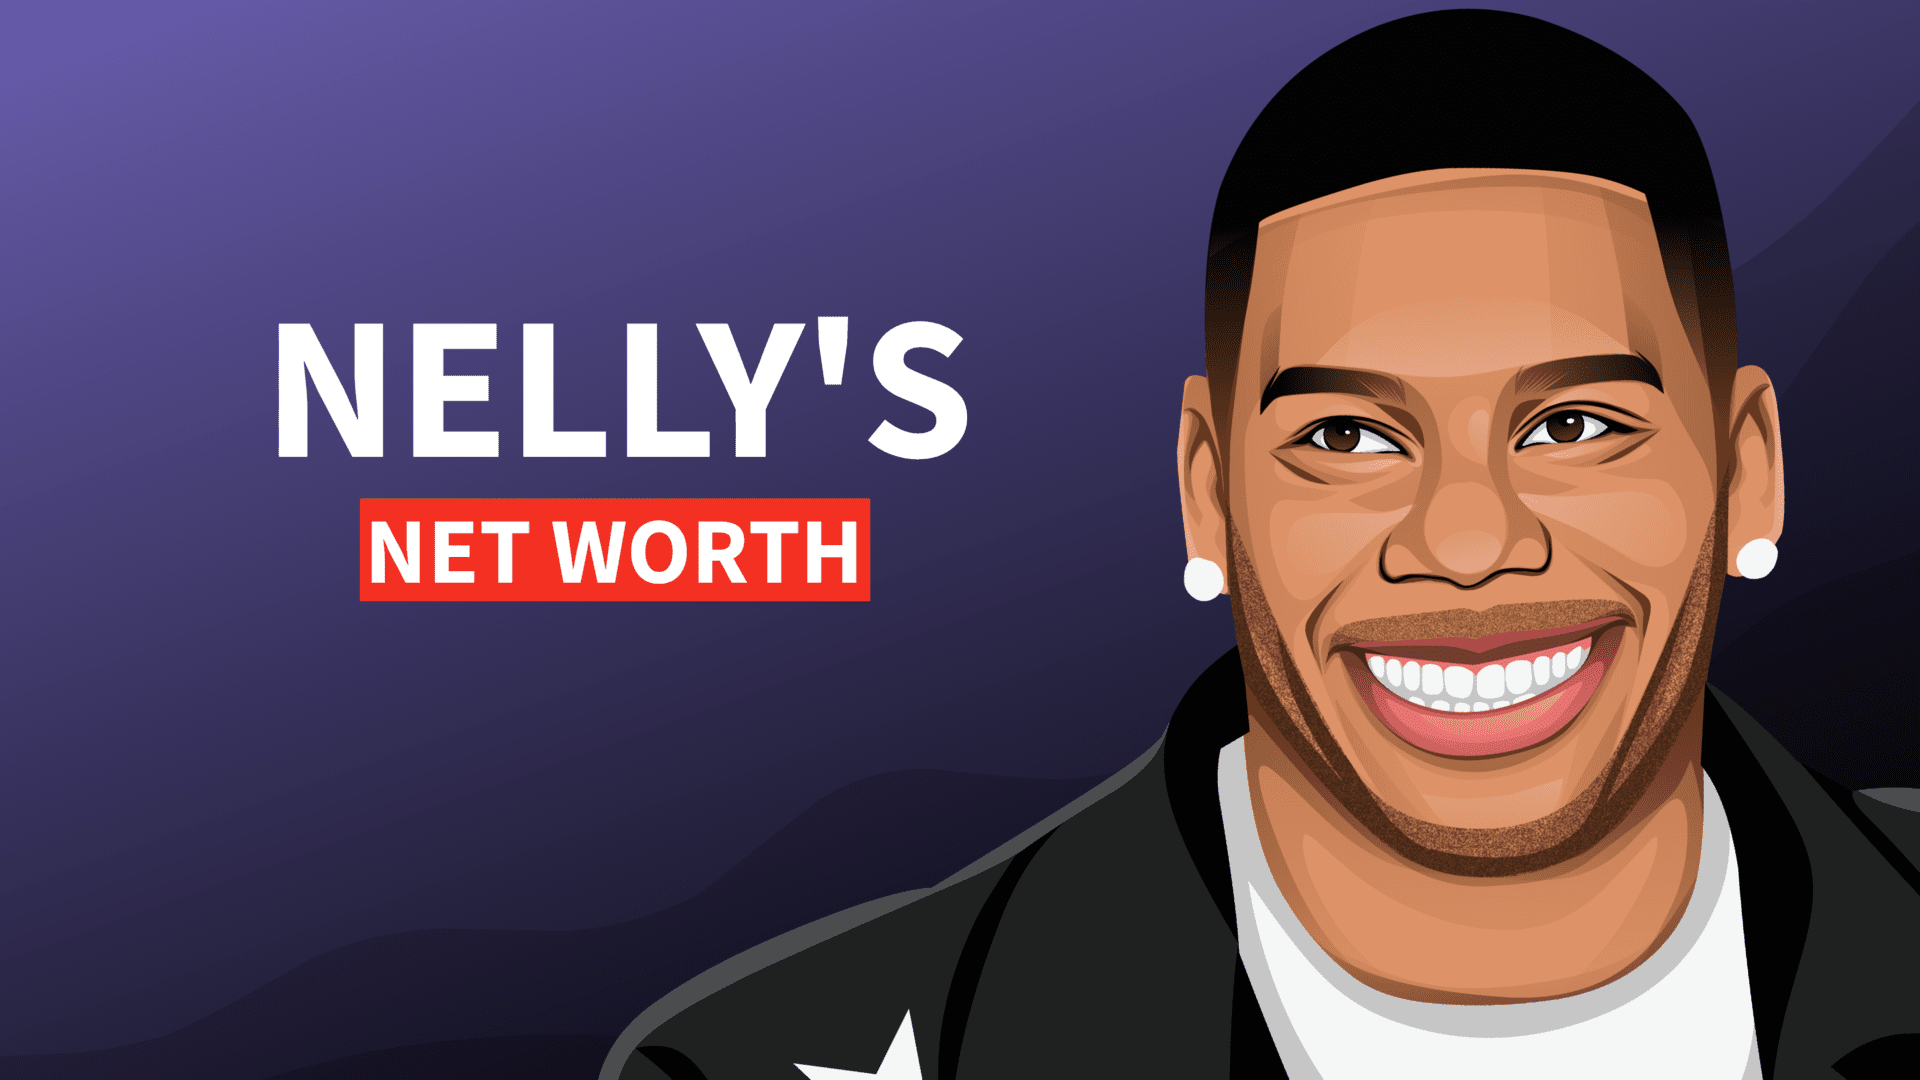 Nelly's Net Worth and Story